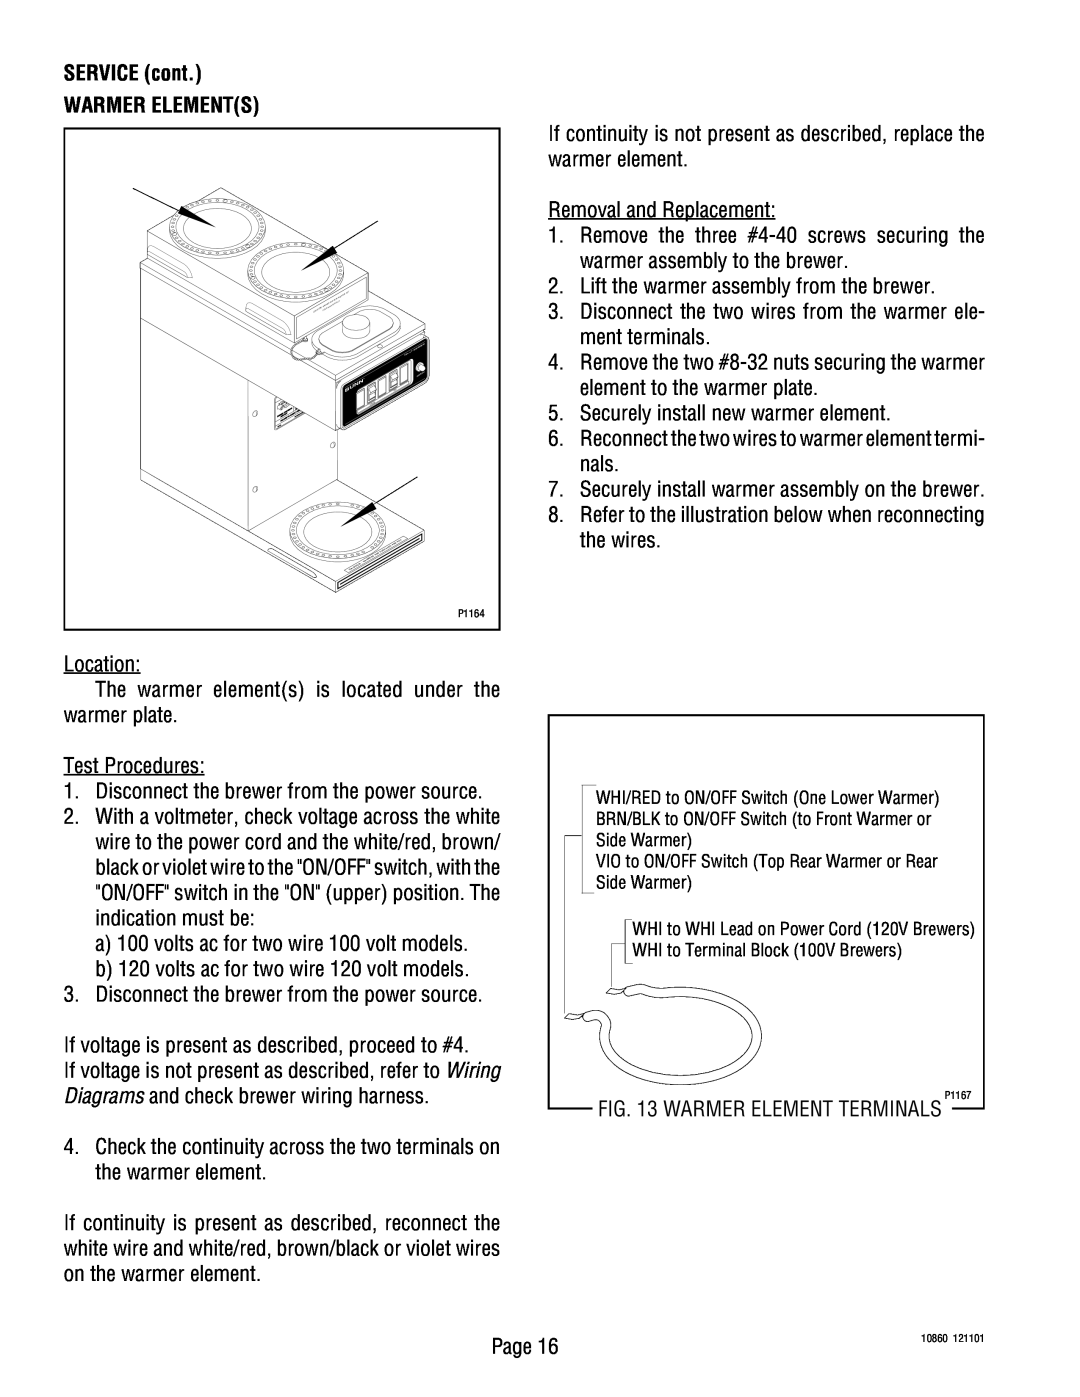 Bunn VP17B service manual SERVICE cont WARMER ELEMENTS, VIO to ON/OFF Switch Top Rear Warmer or Rear Side Warmer 